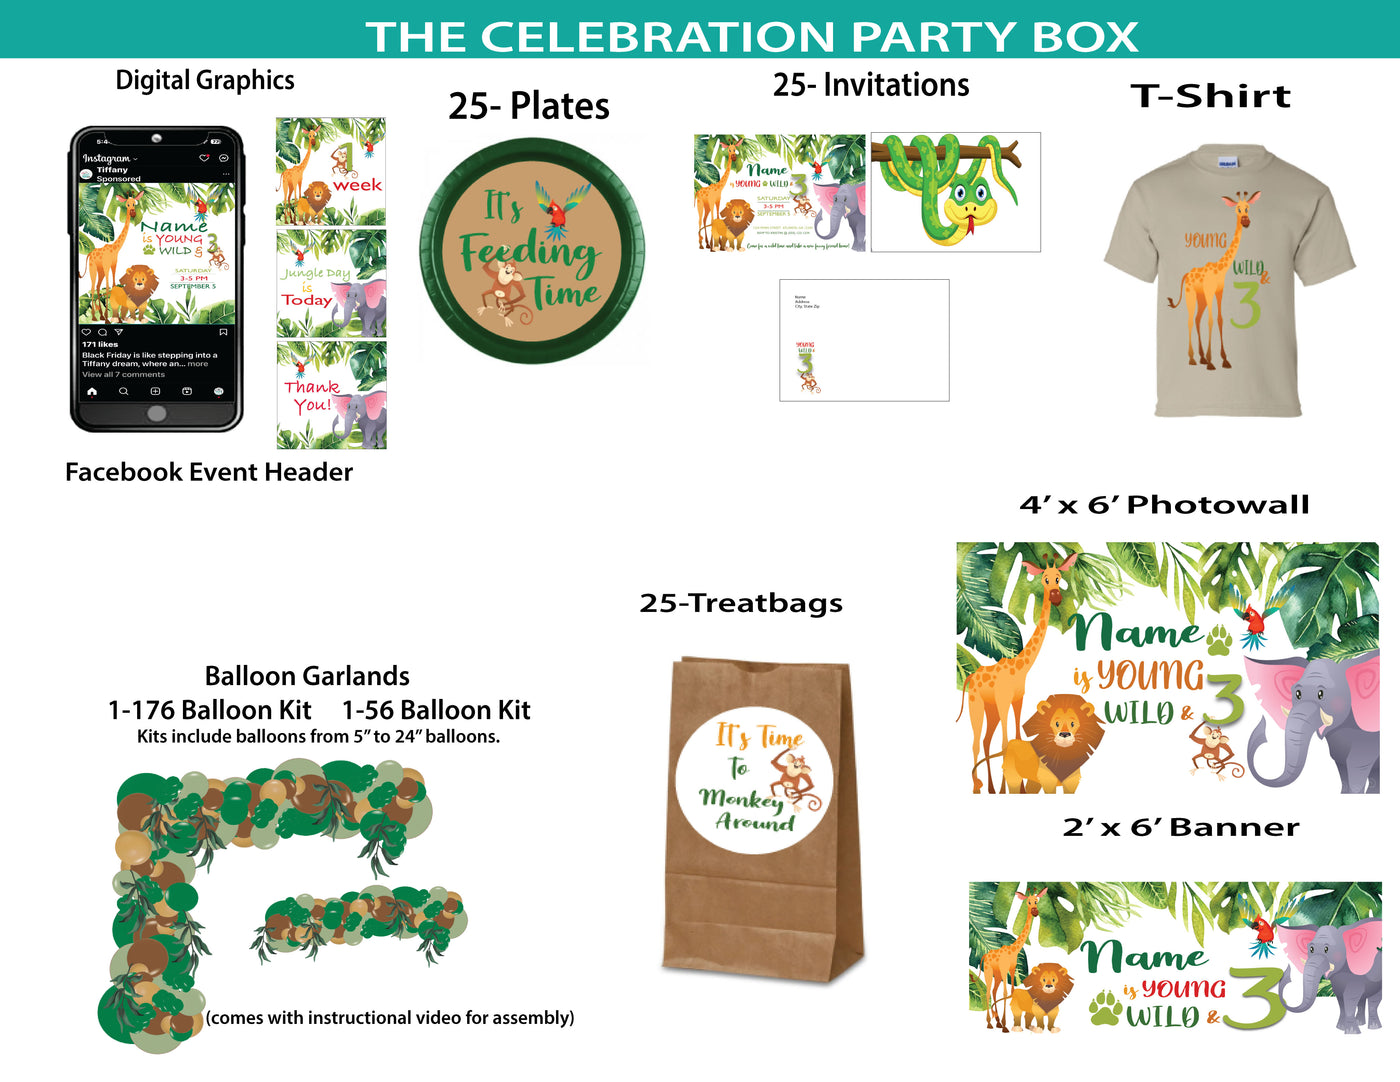 Young, Wild and Three -Celebration Party Box